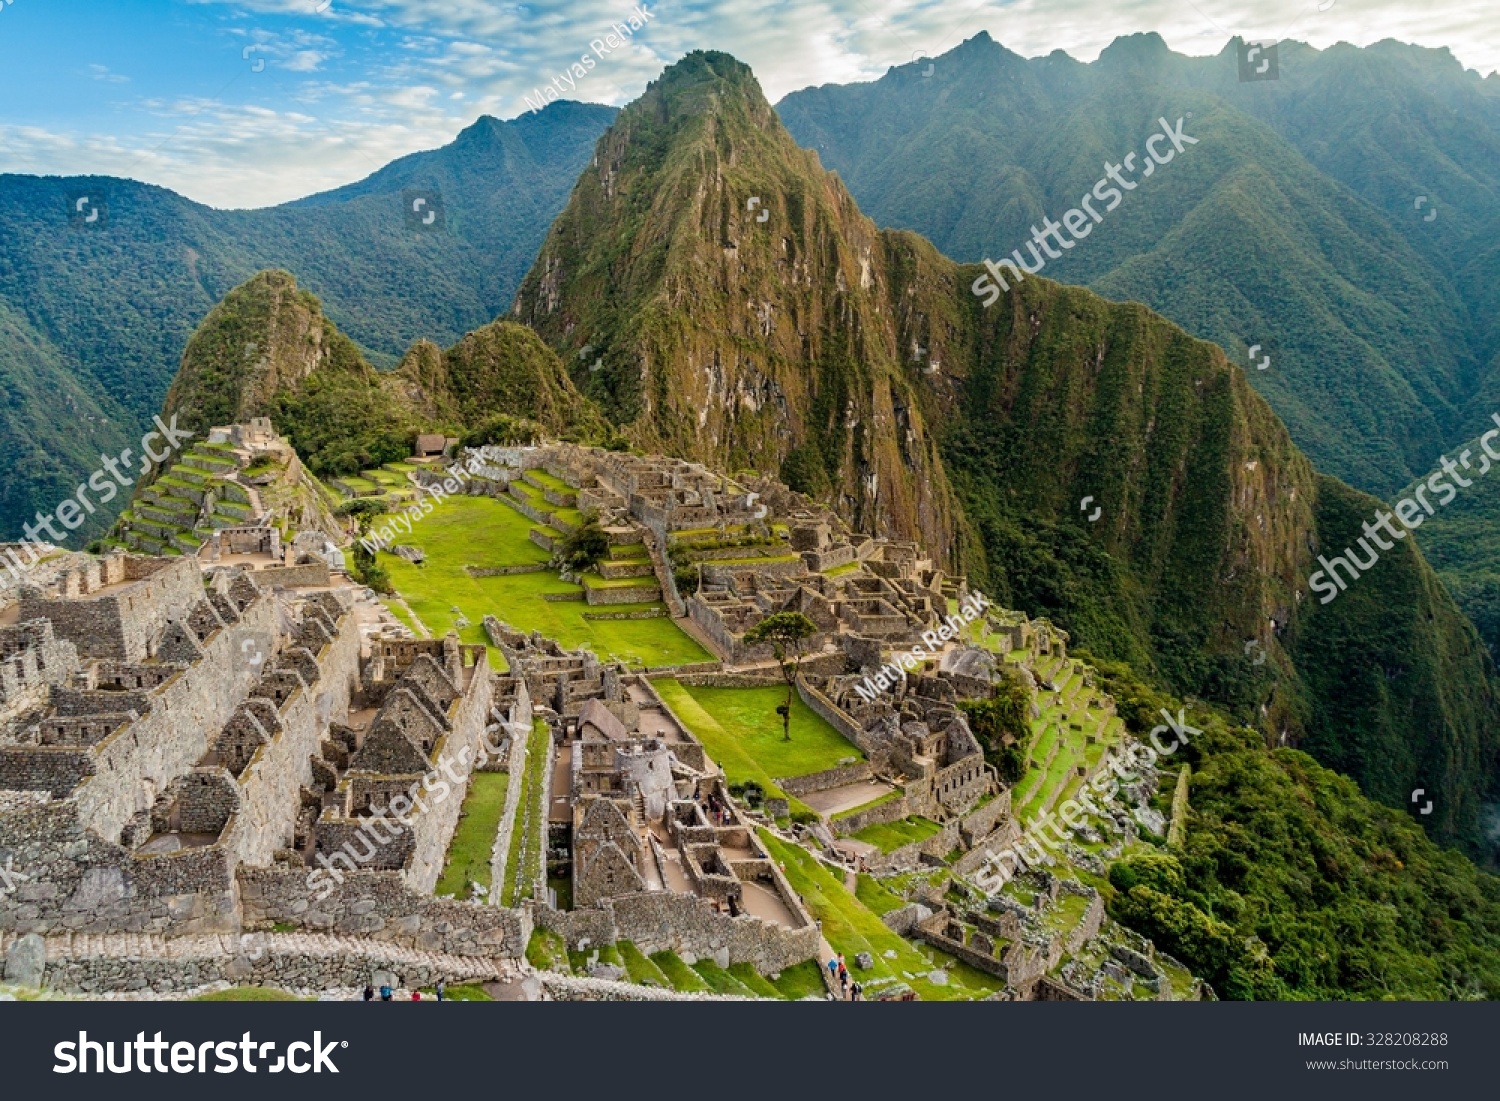 It would destroy it: new international airport for Machu 